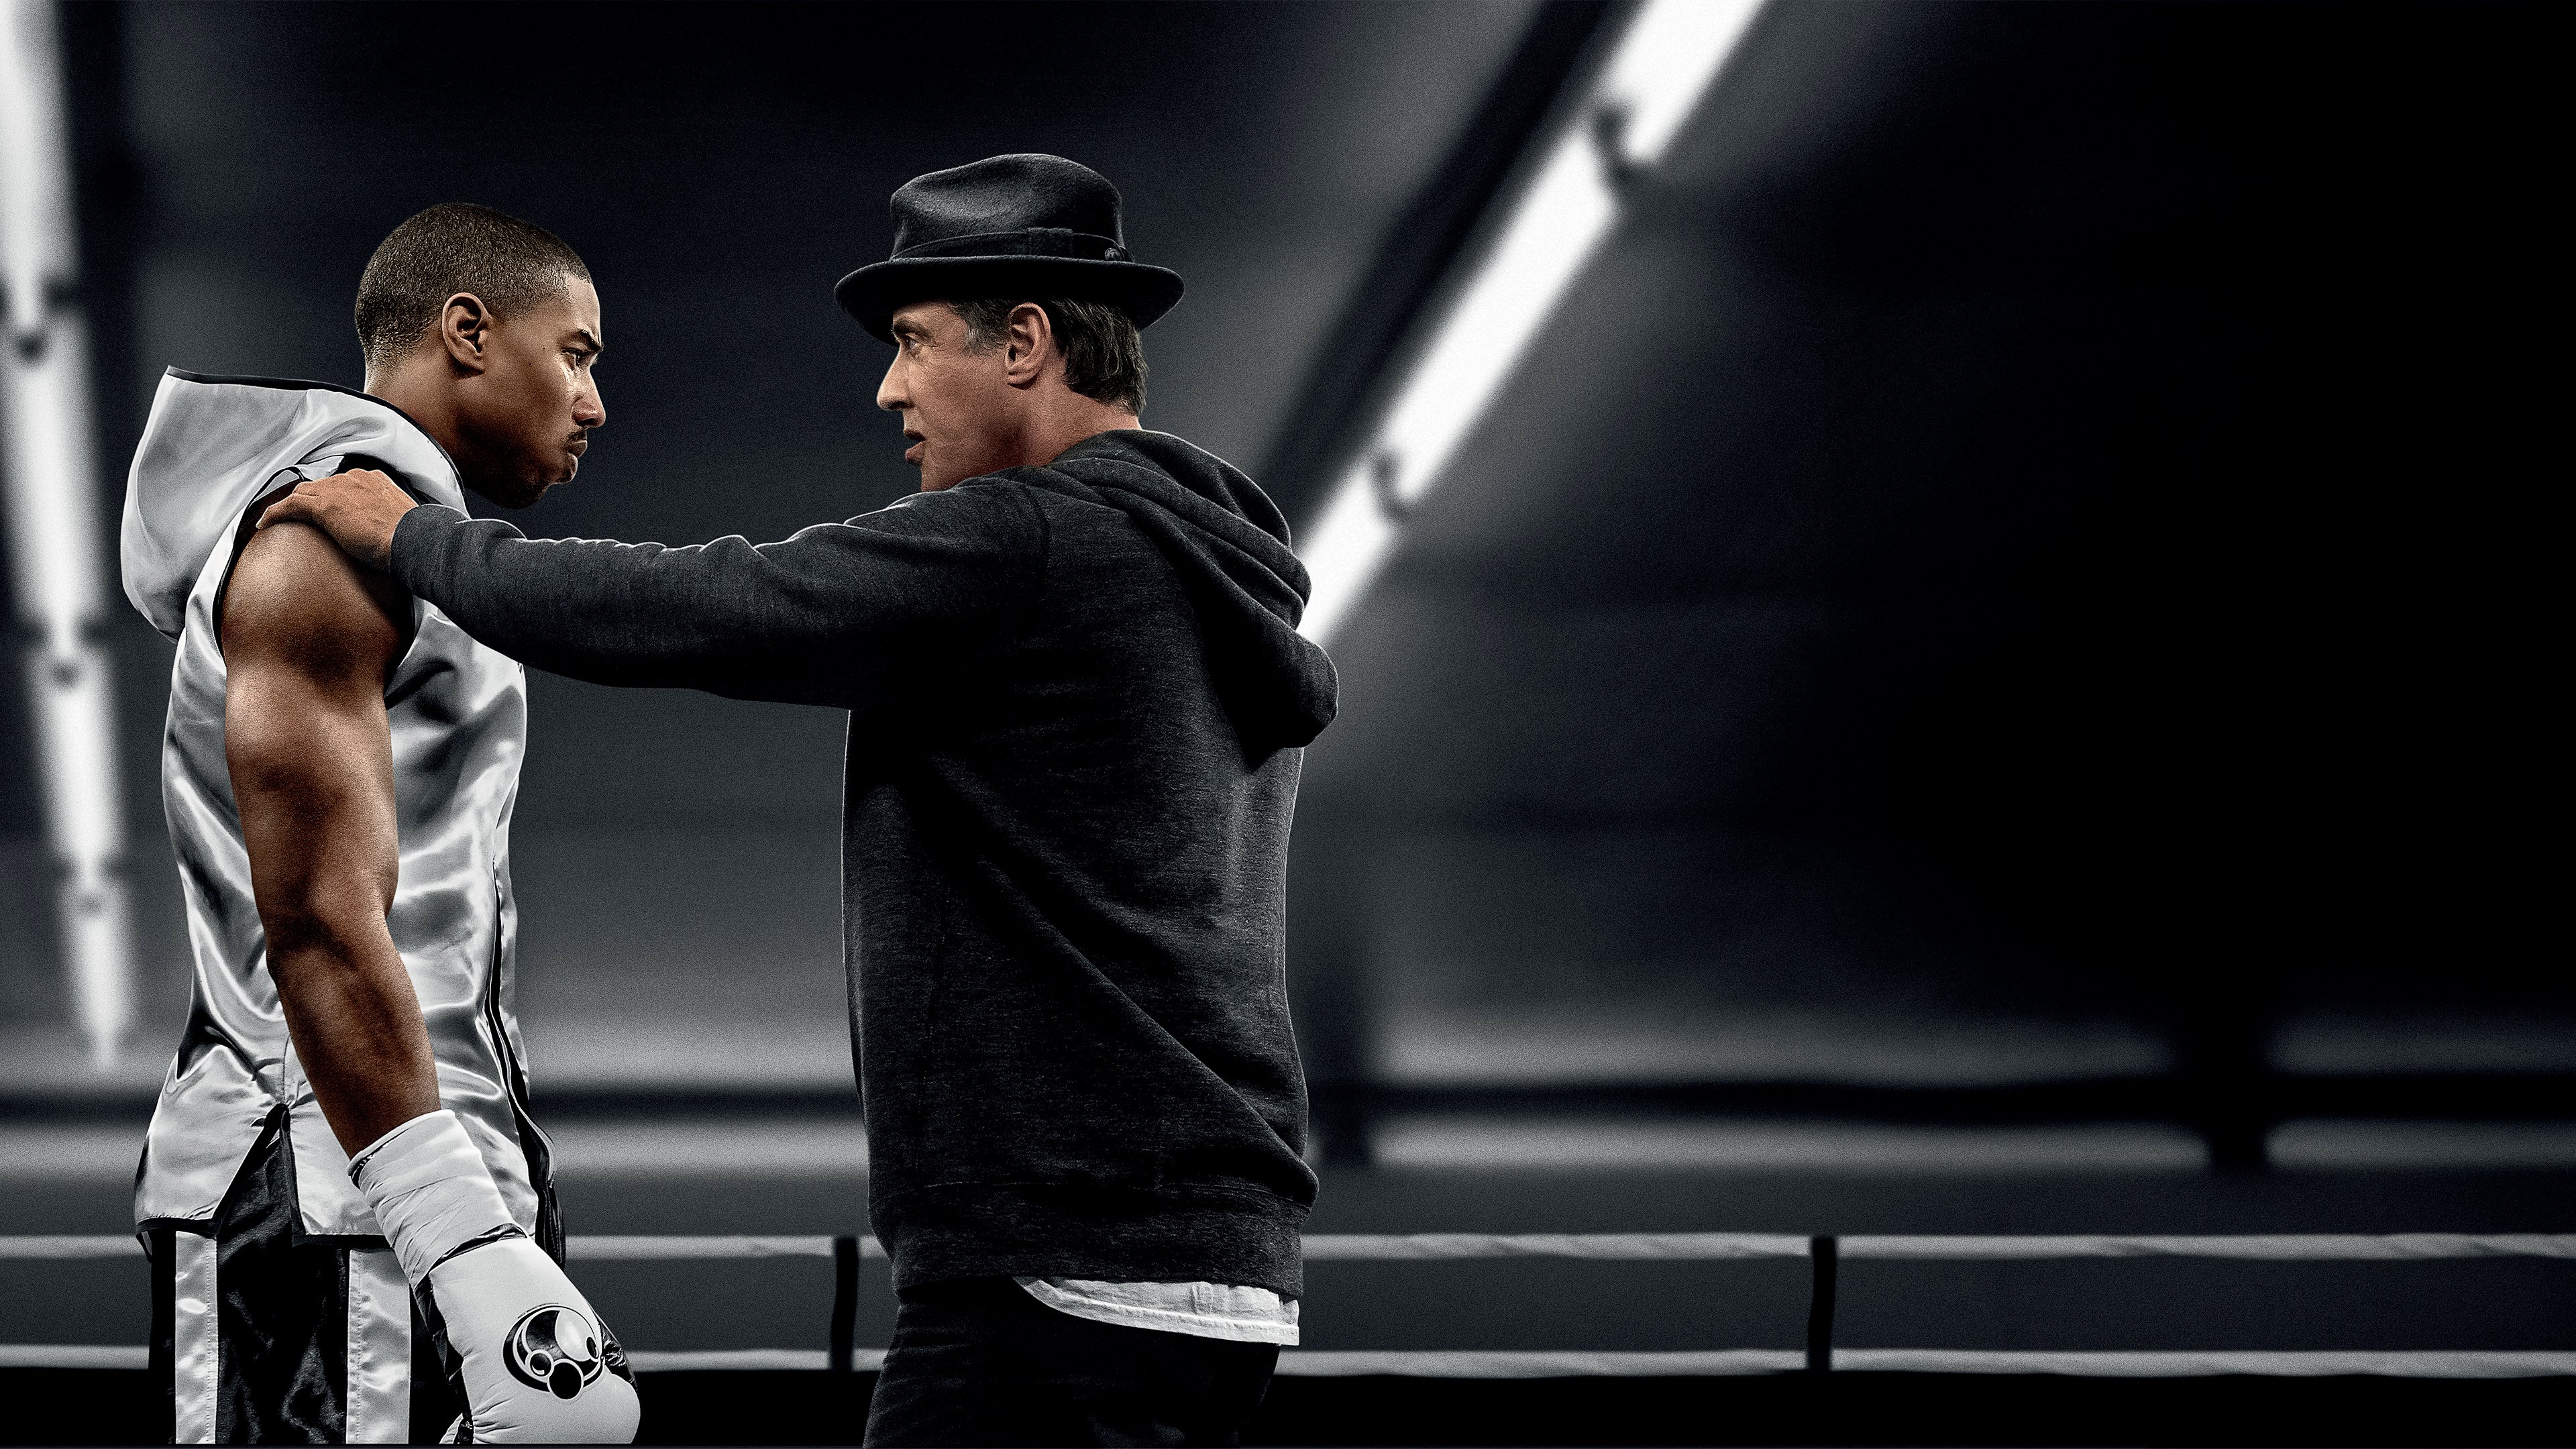 Movie Creed HD Wallpaper | Background Image